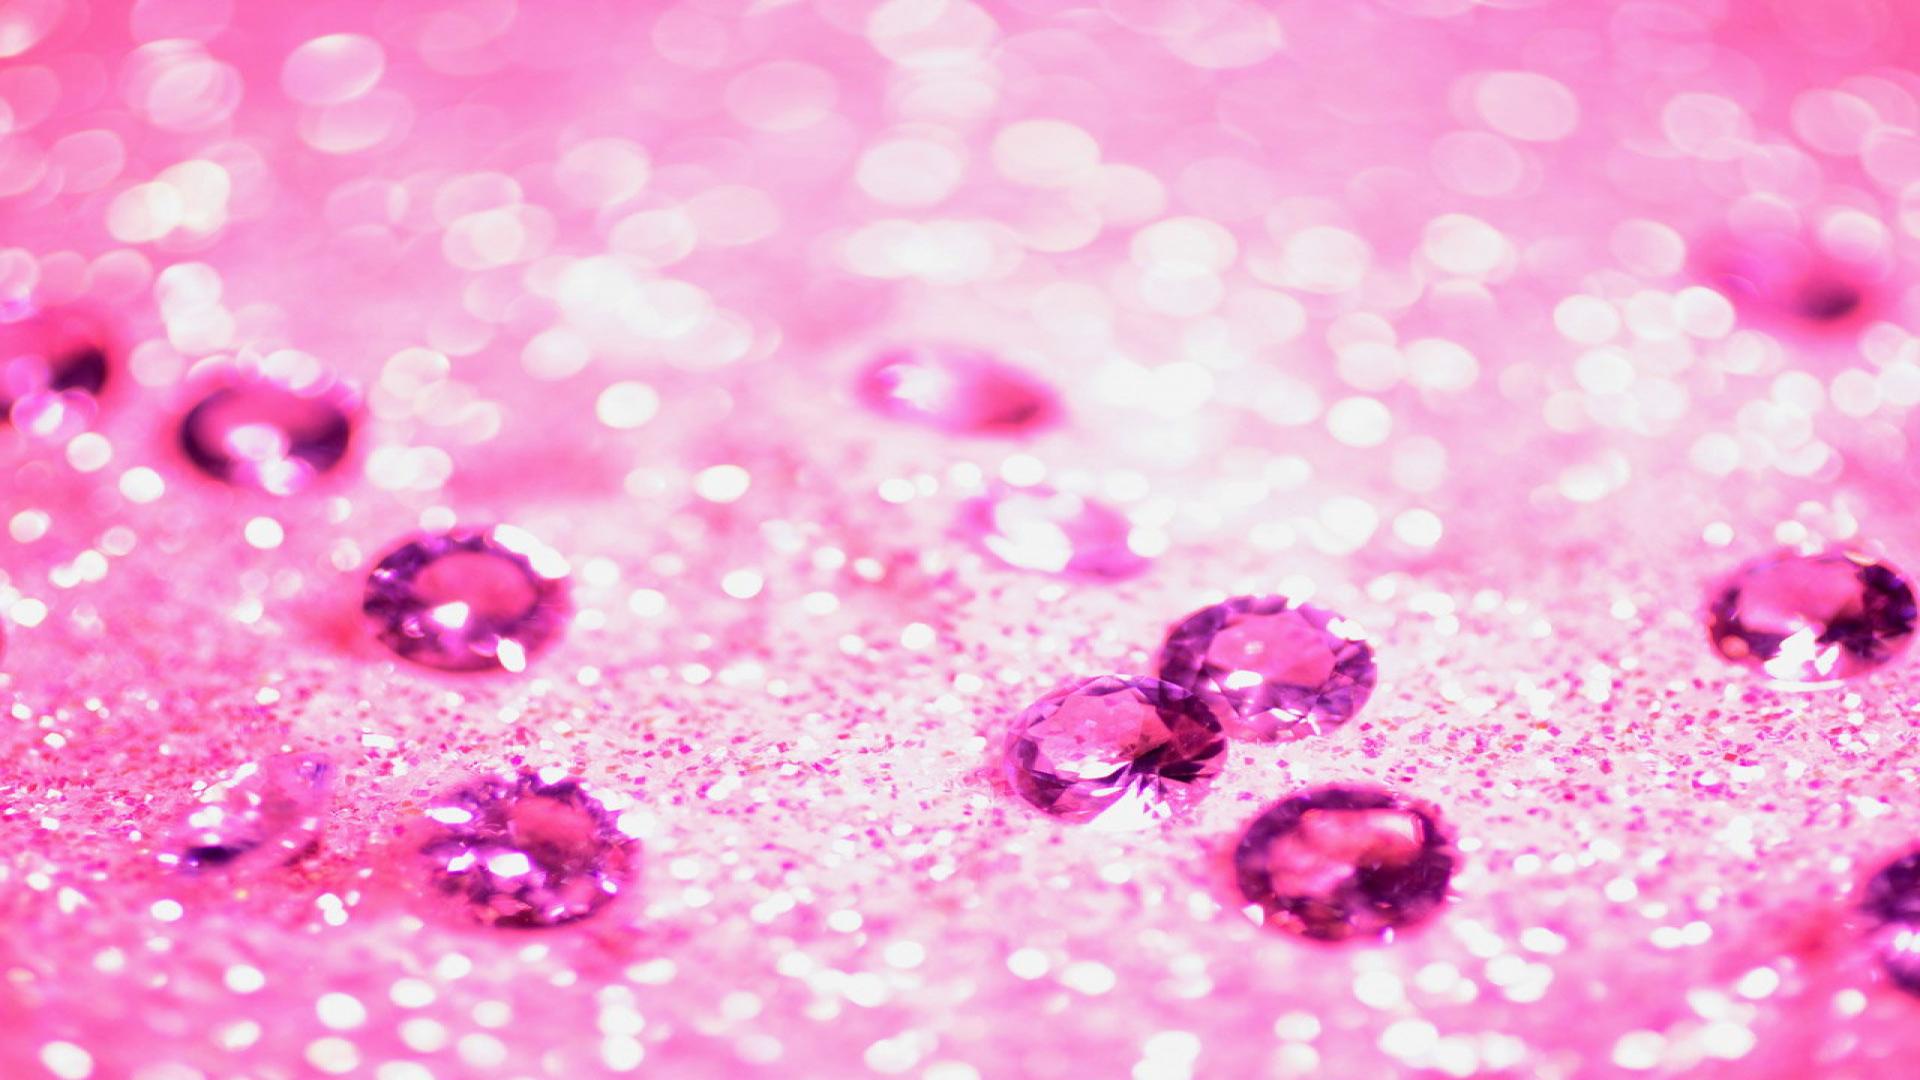 Image Of Sparkly Wallpaper On